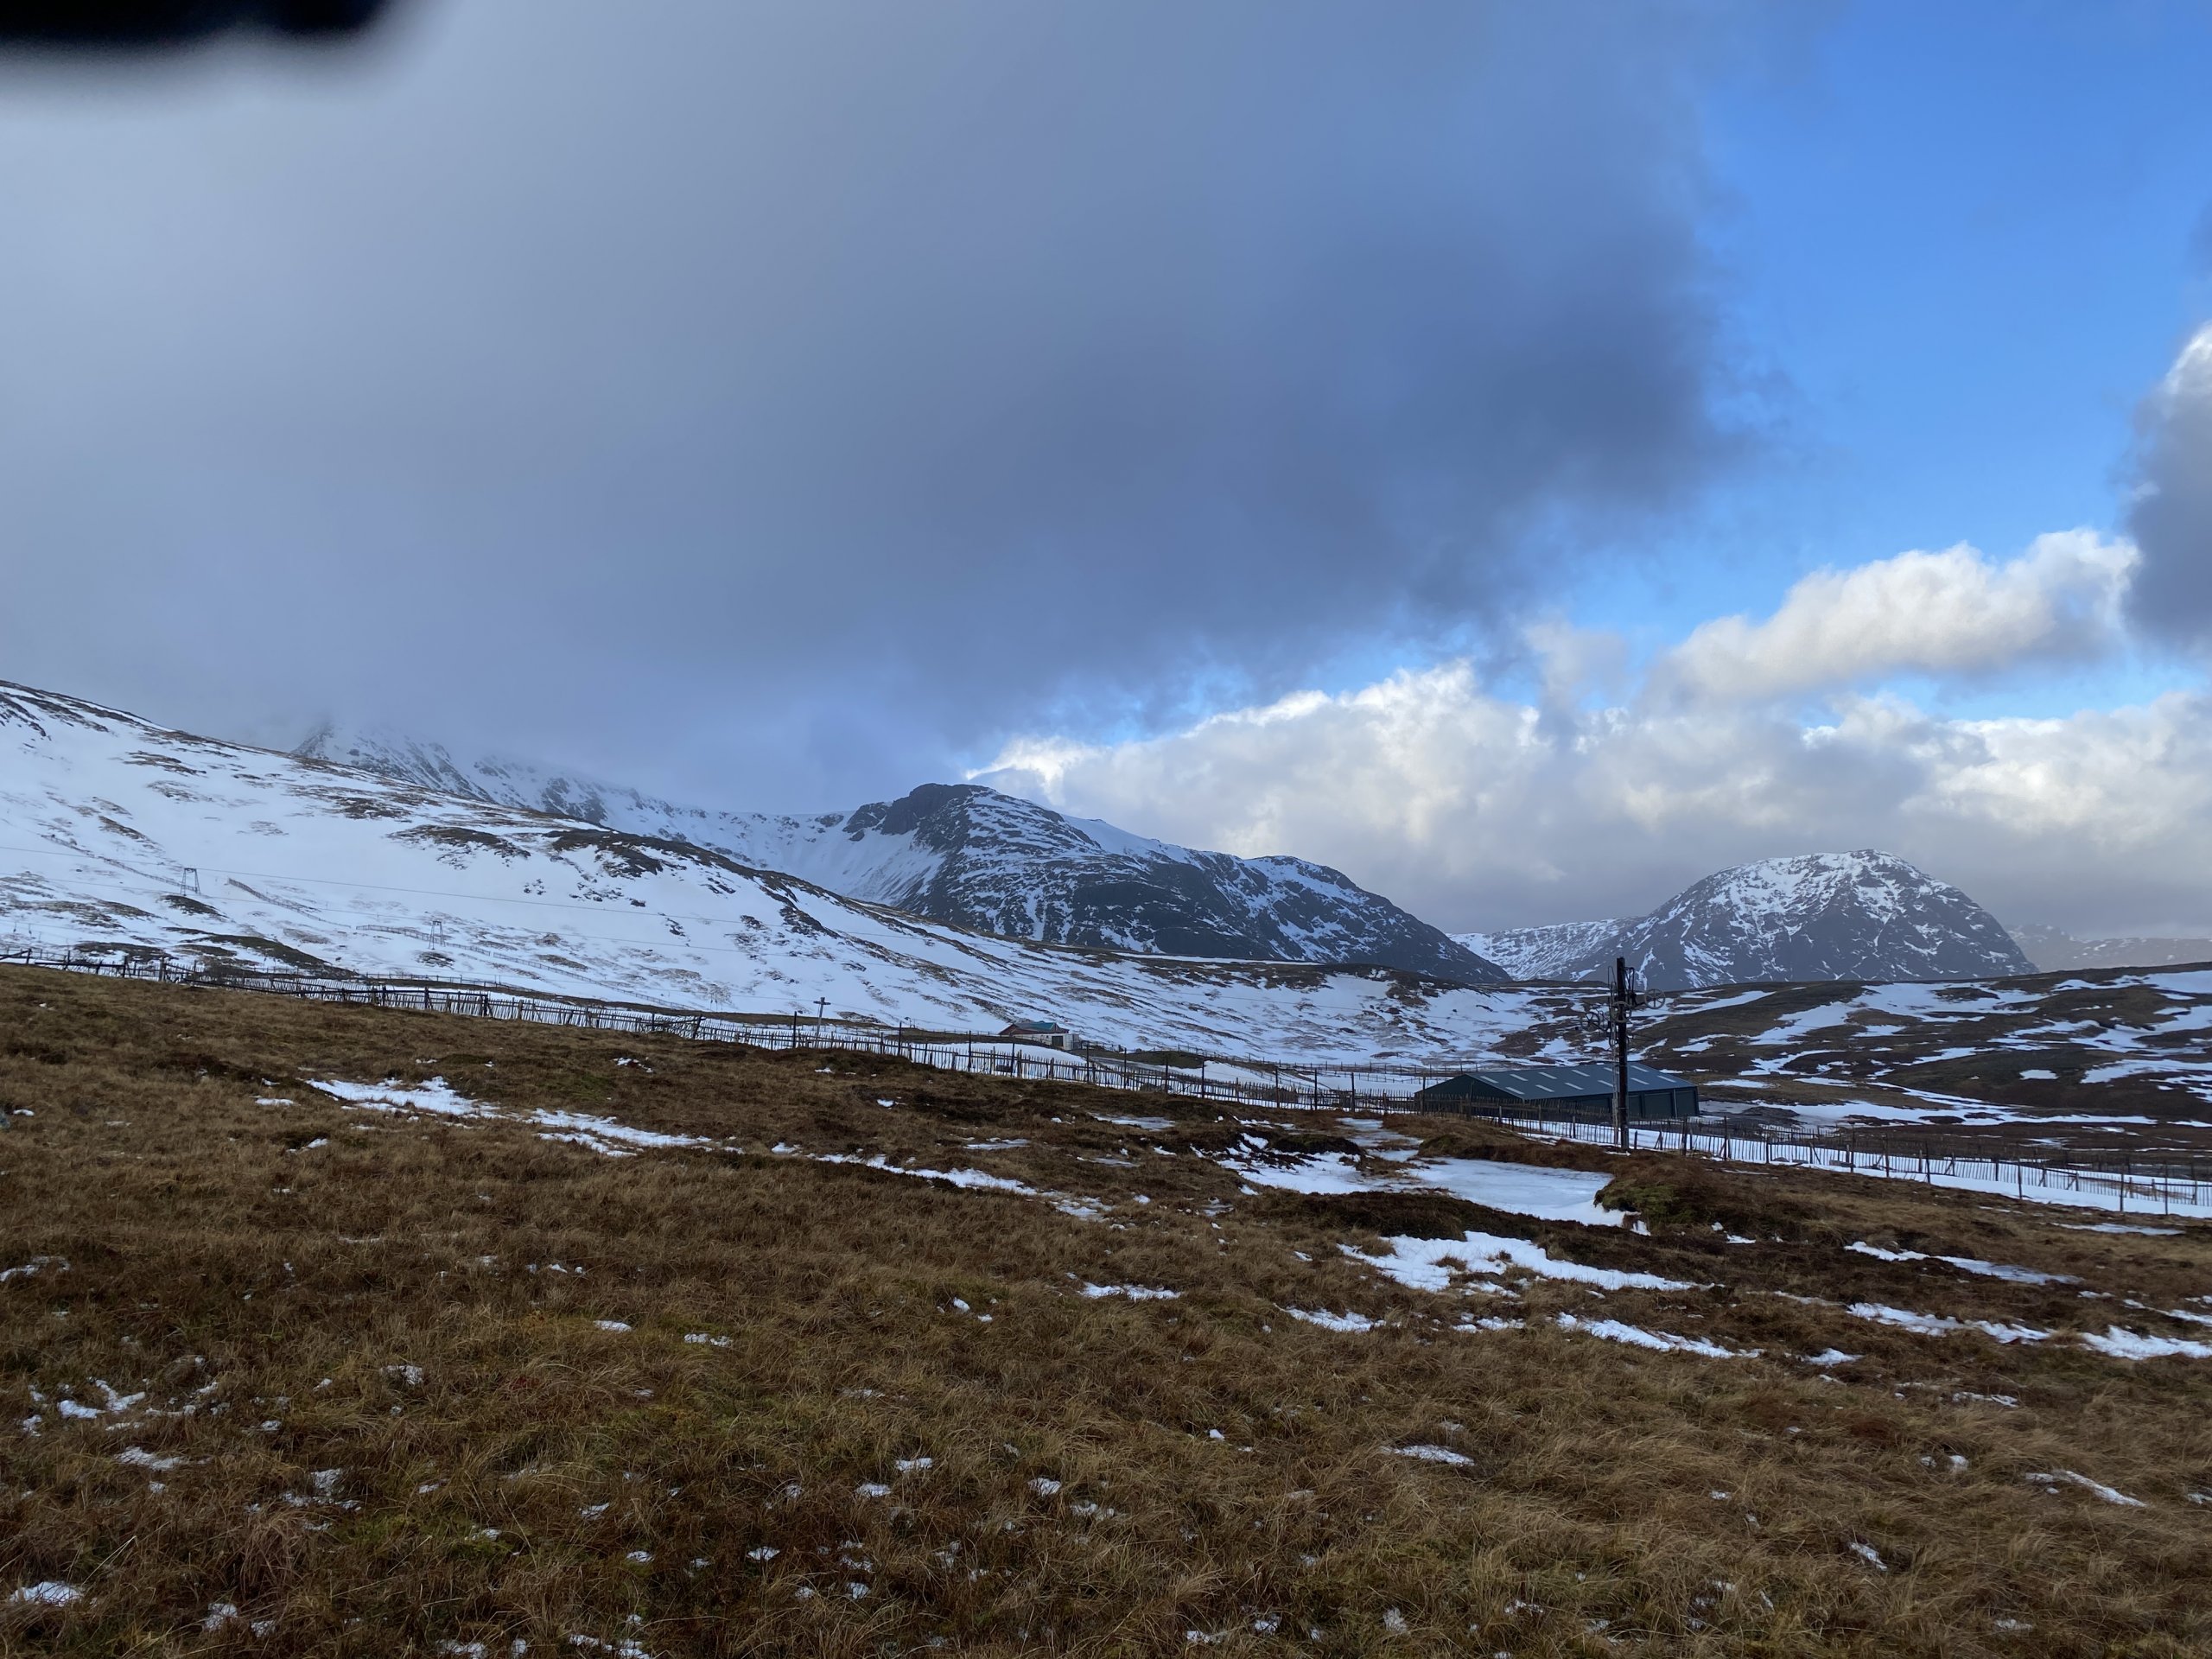 Looking across to Creise, on the left and Stob Dearg on the right.